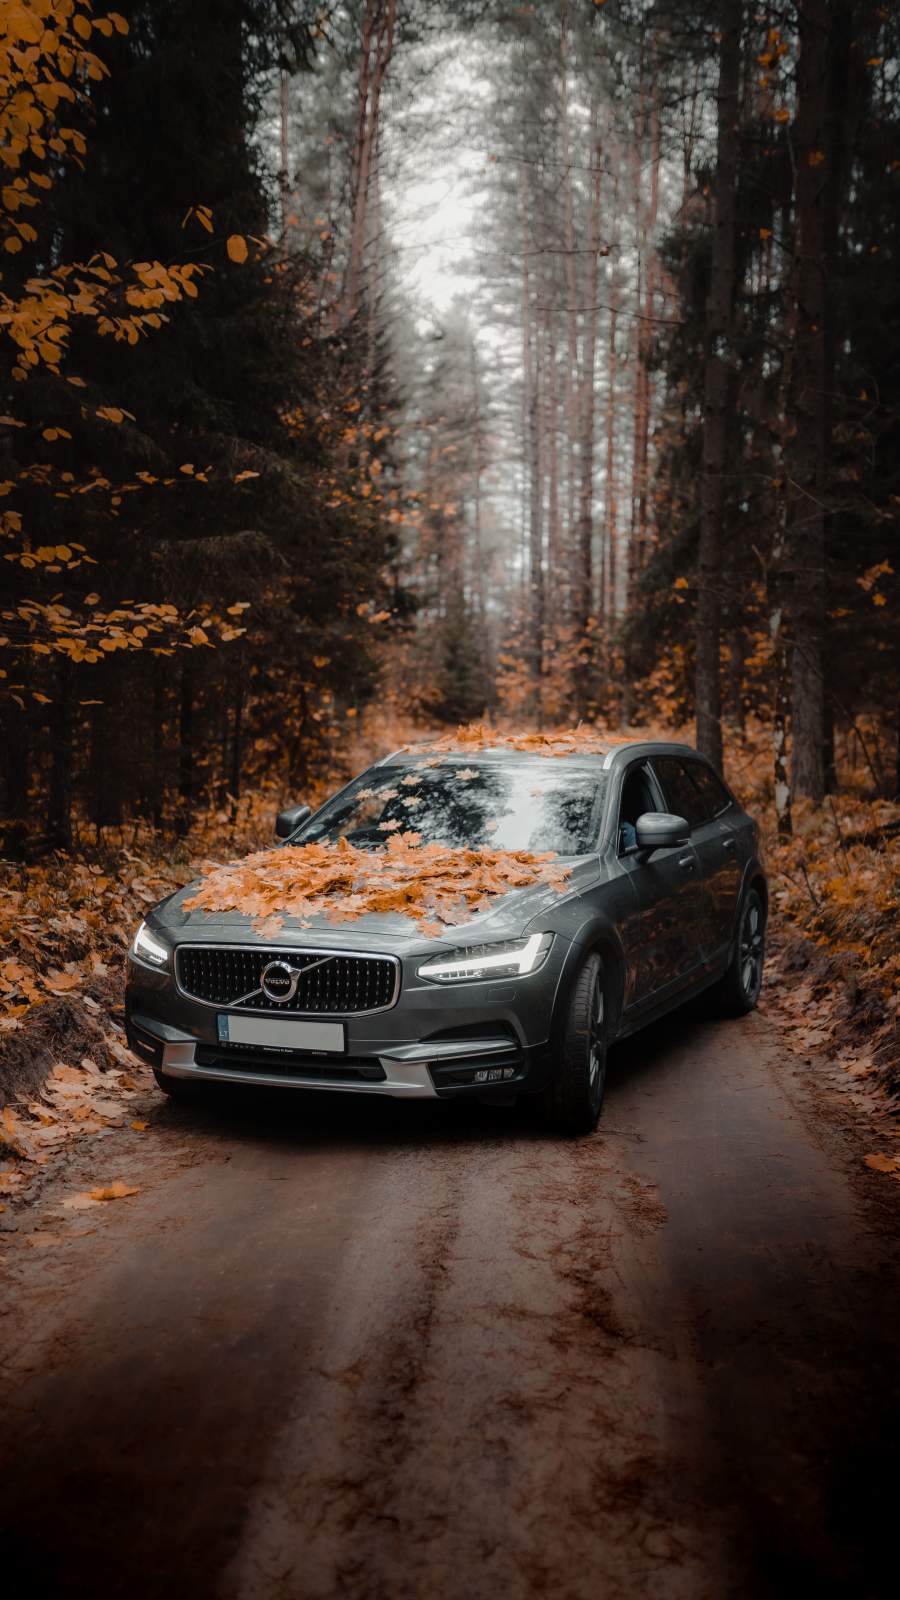 Volvo Suv Iphone Wallpaper Iphone Wallpapers Iphone Wallpapers